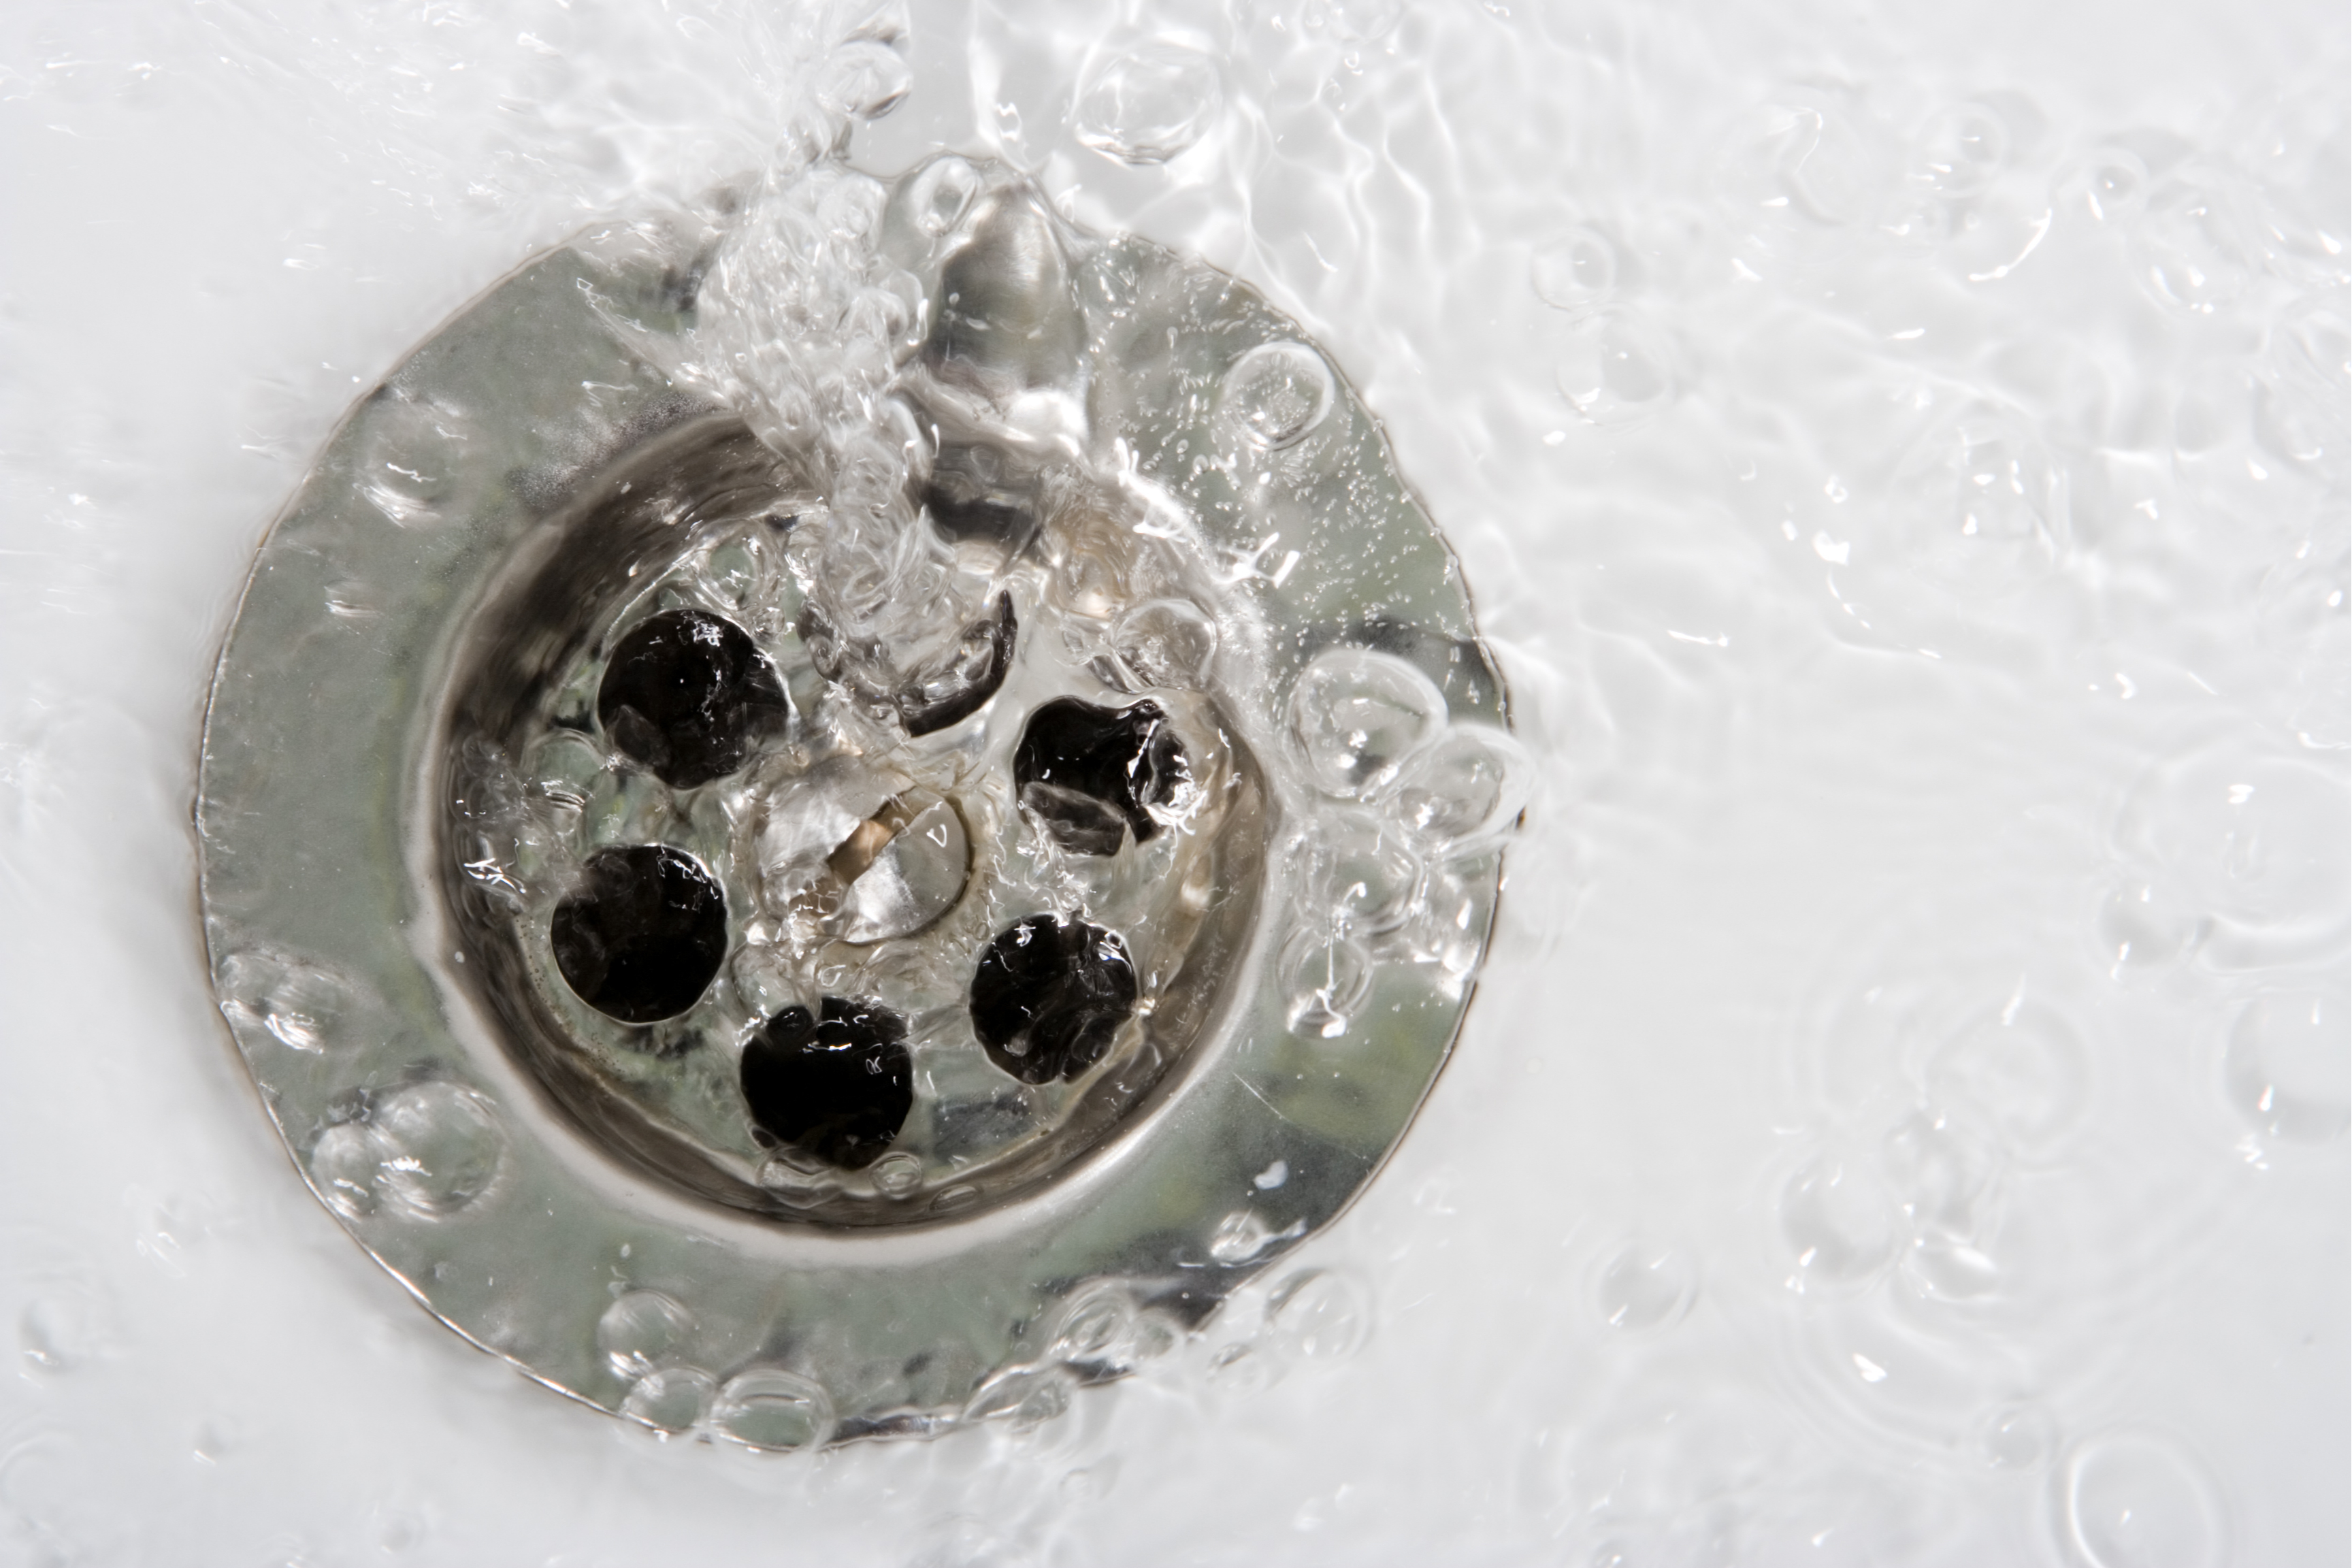 Bathroom Drain Cleaning, Webster Groves